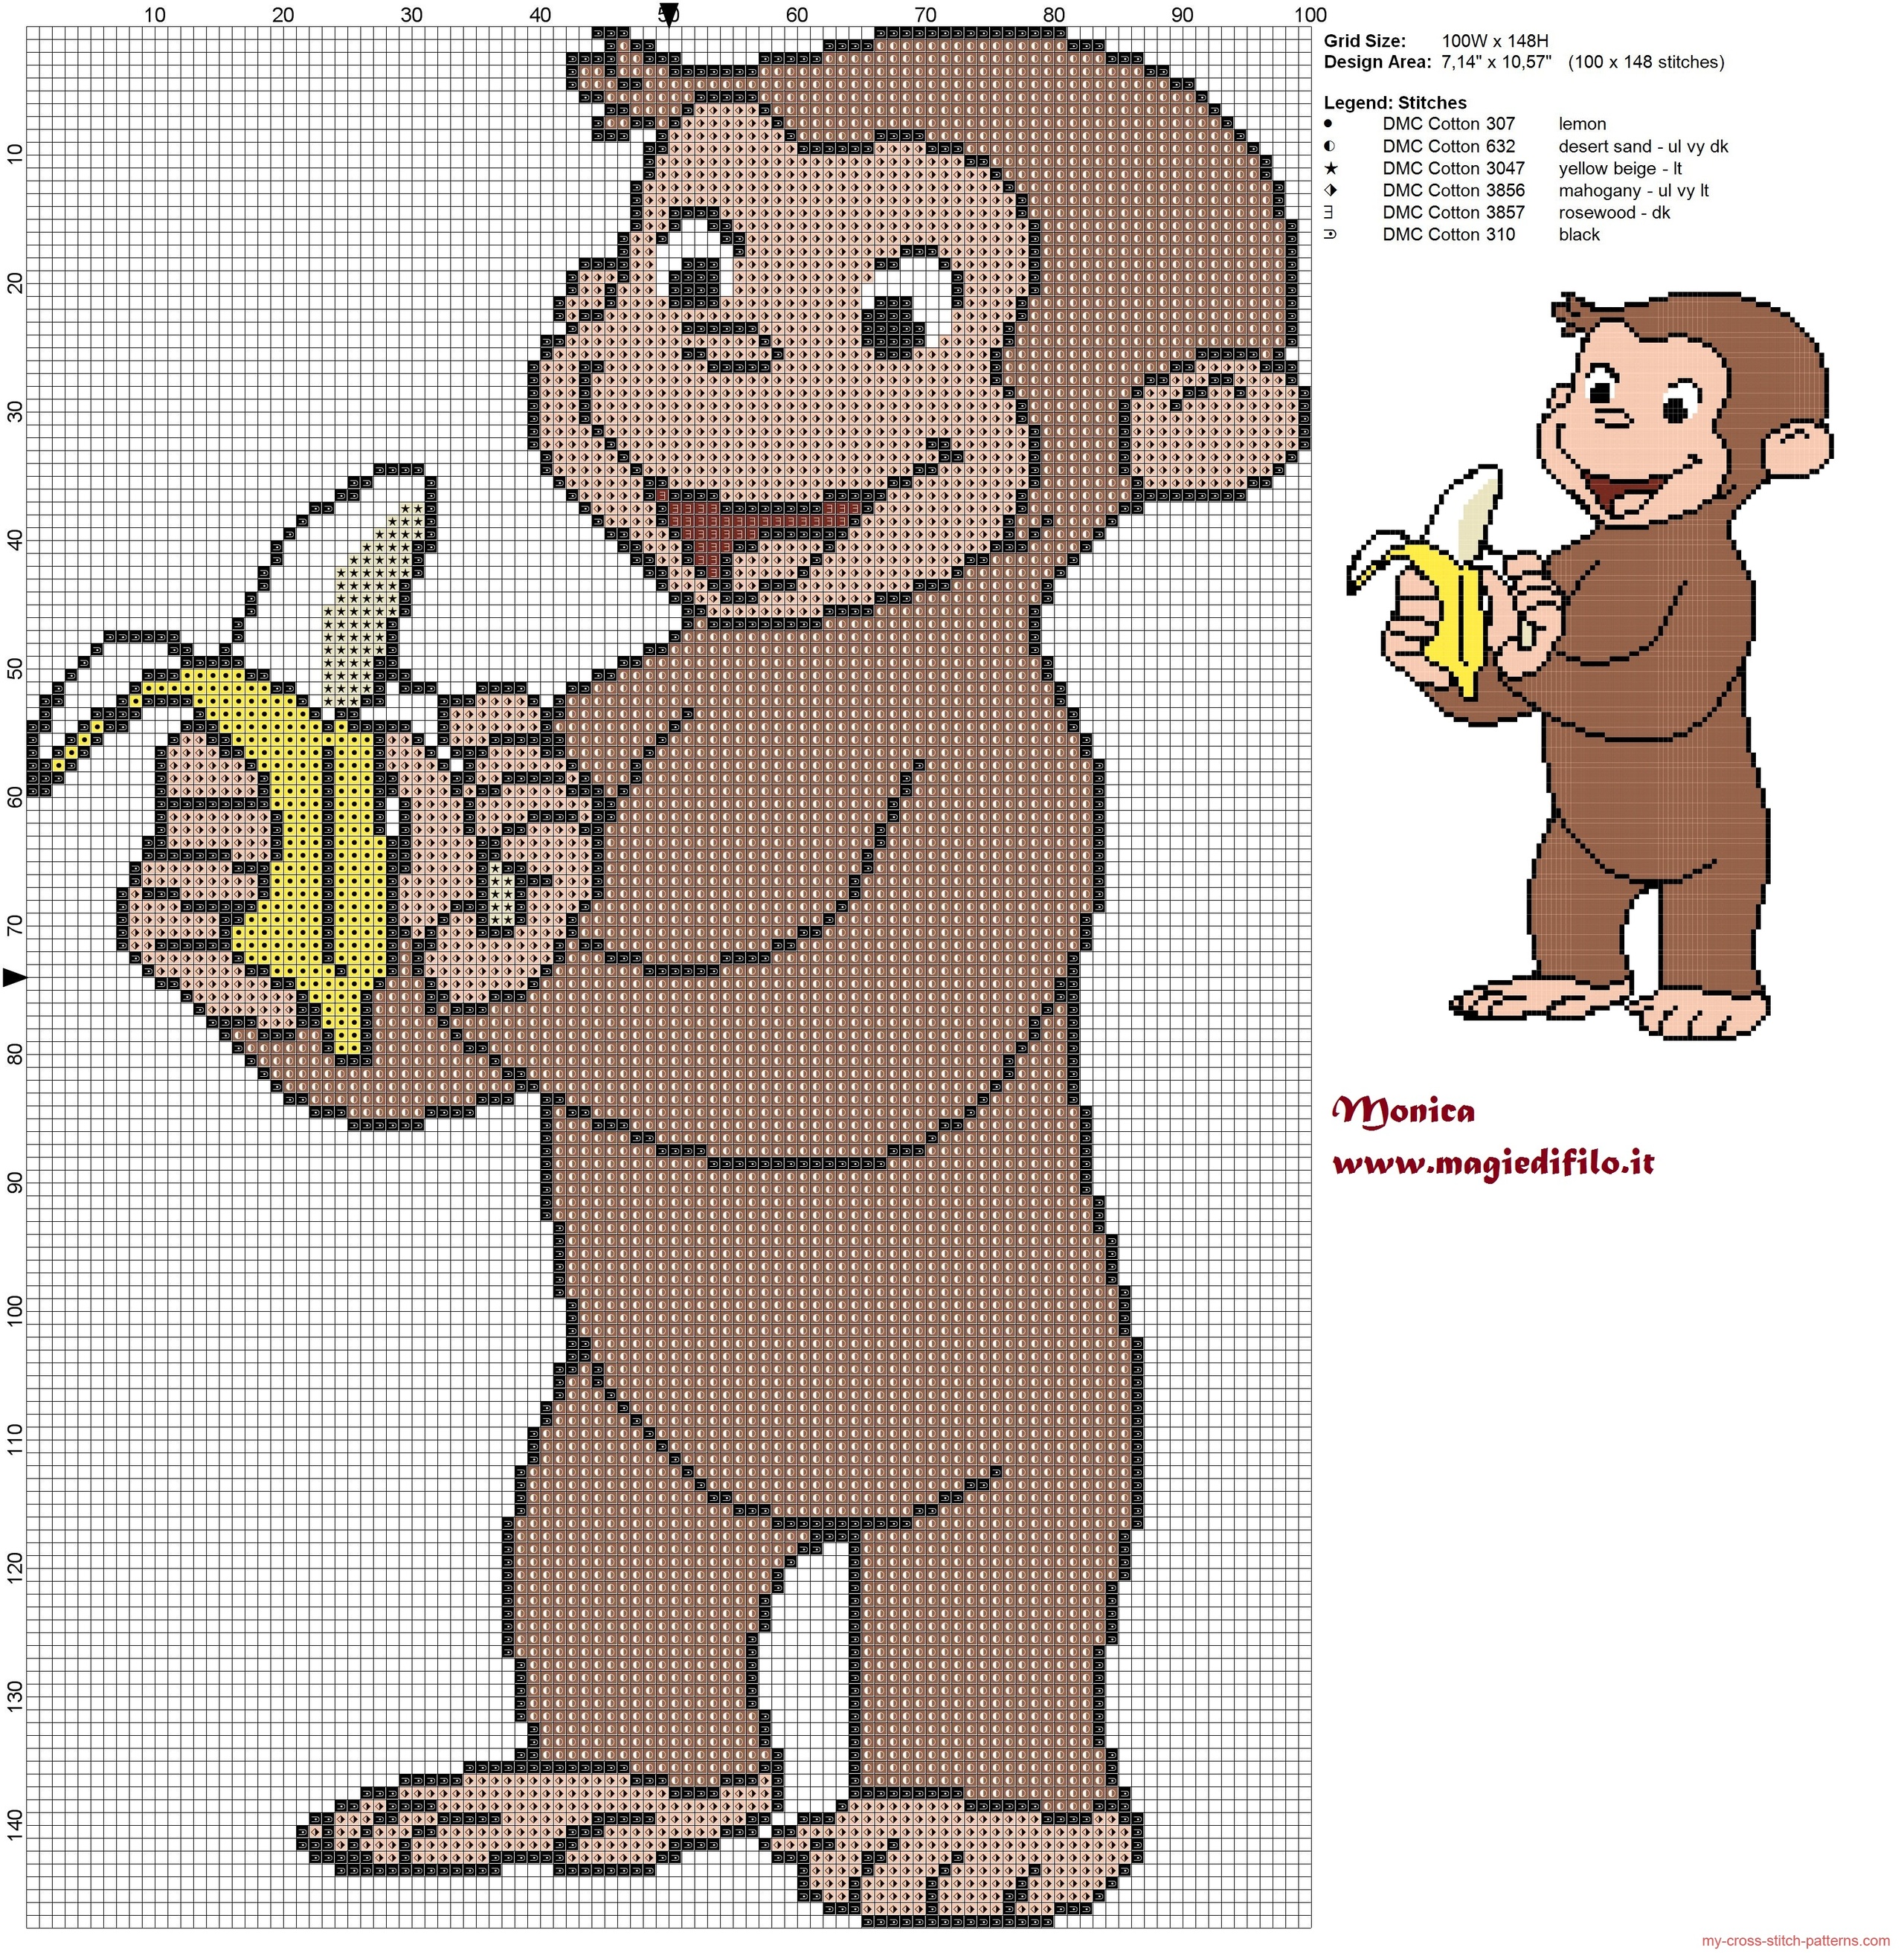 george_with_banana_curious_george_cross_stitch_pattern_